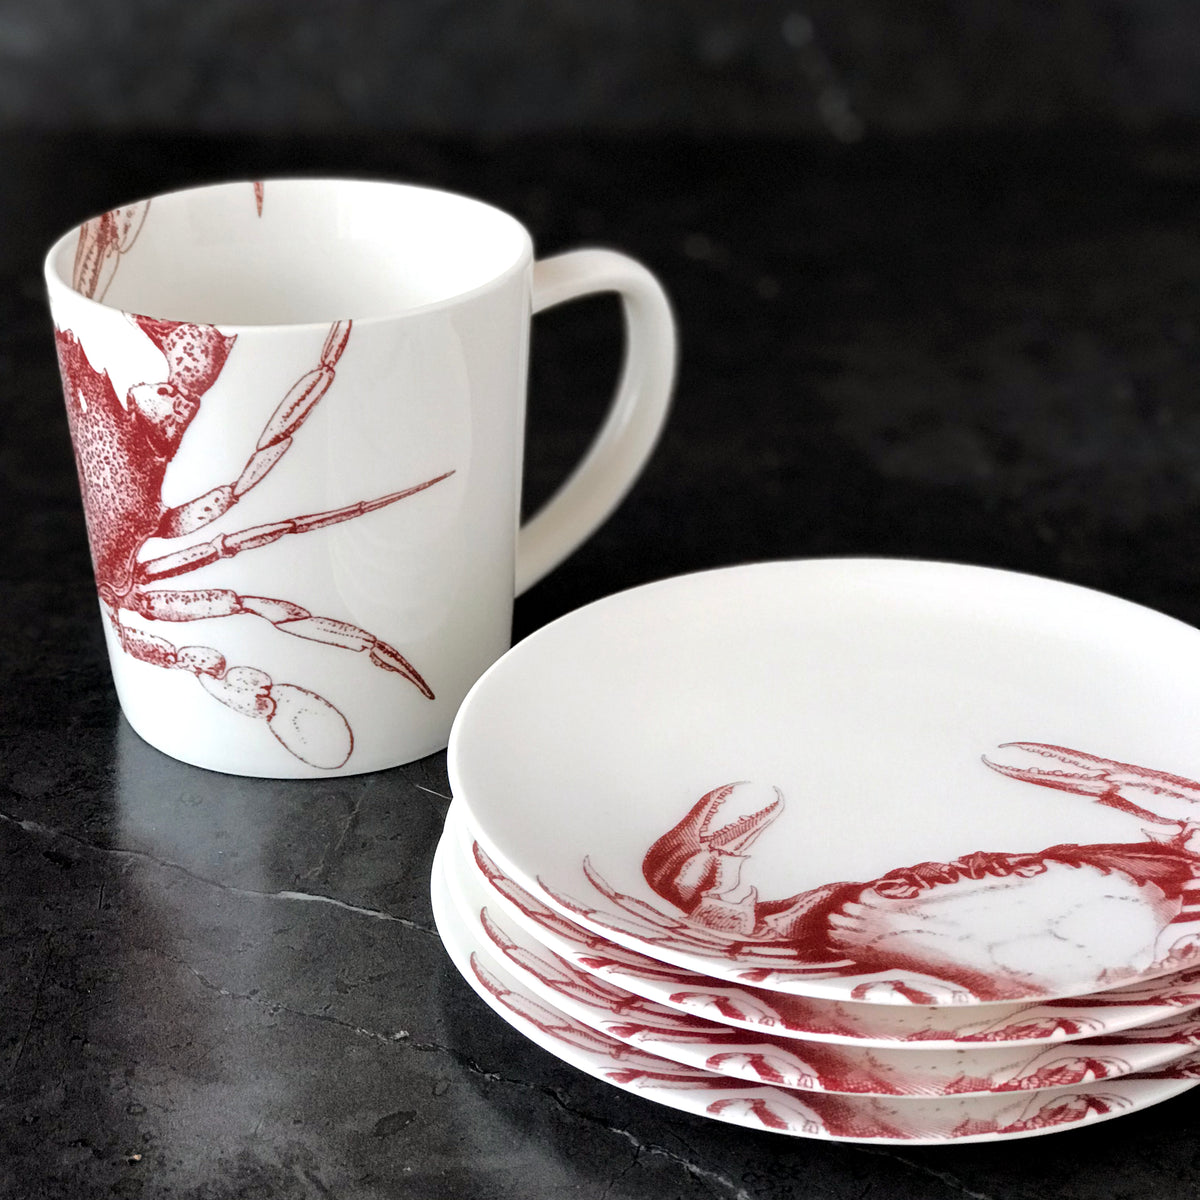 A set of Crab Red Canapé Plates and mugs by Caskata Artisanal Home, perfect for serving appetizers.